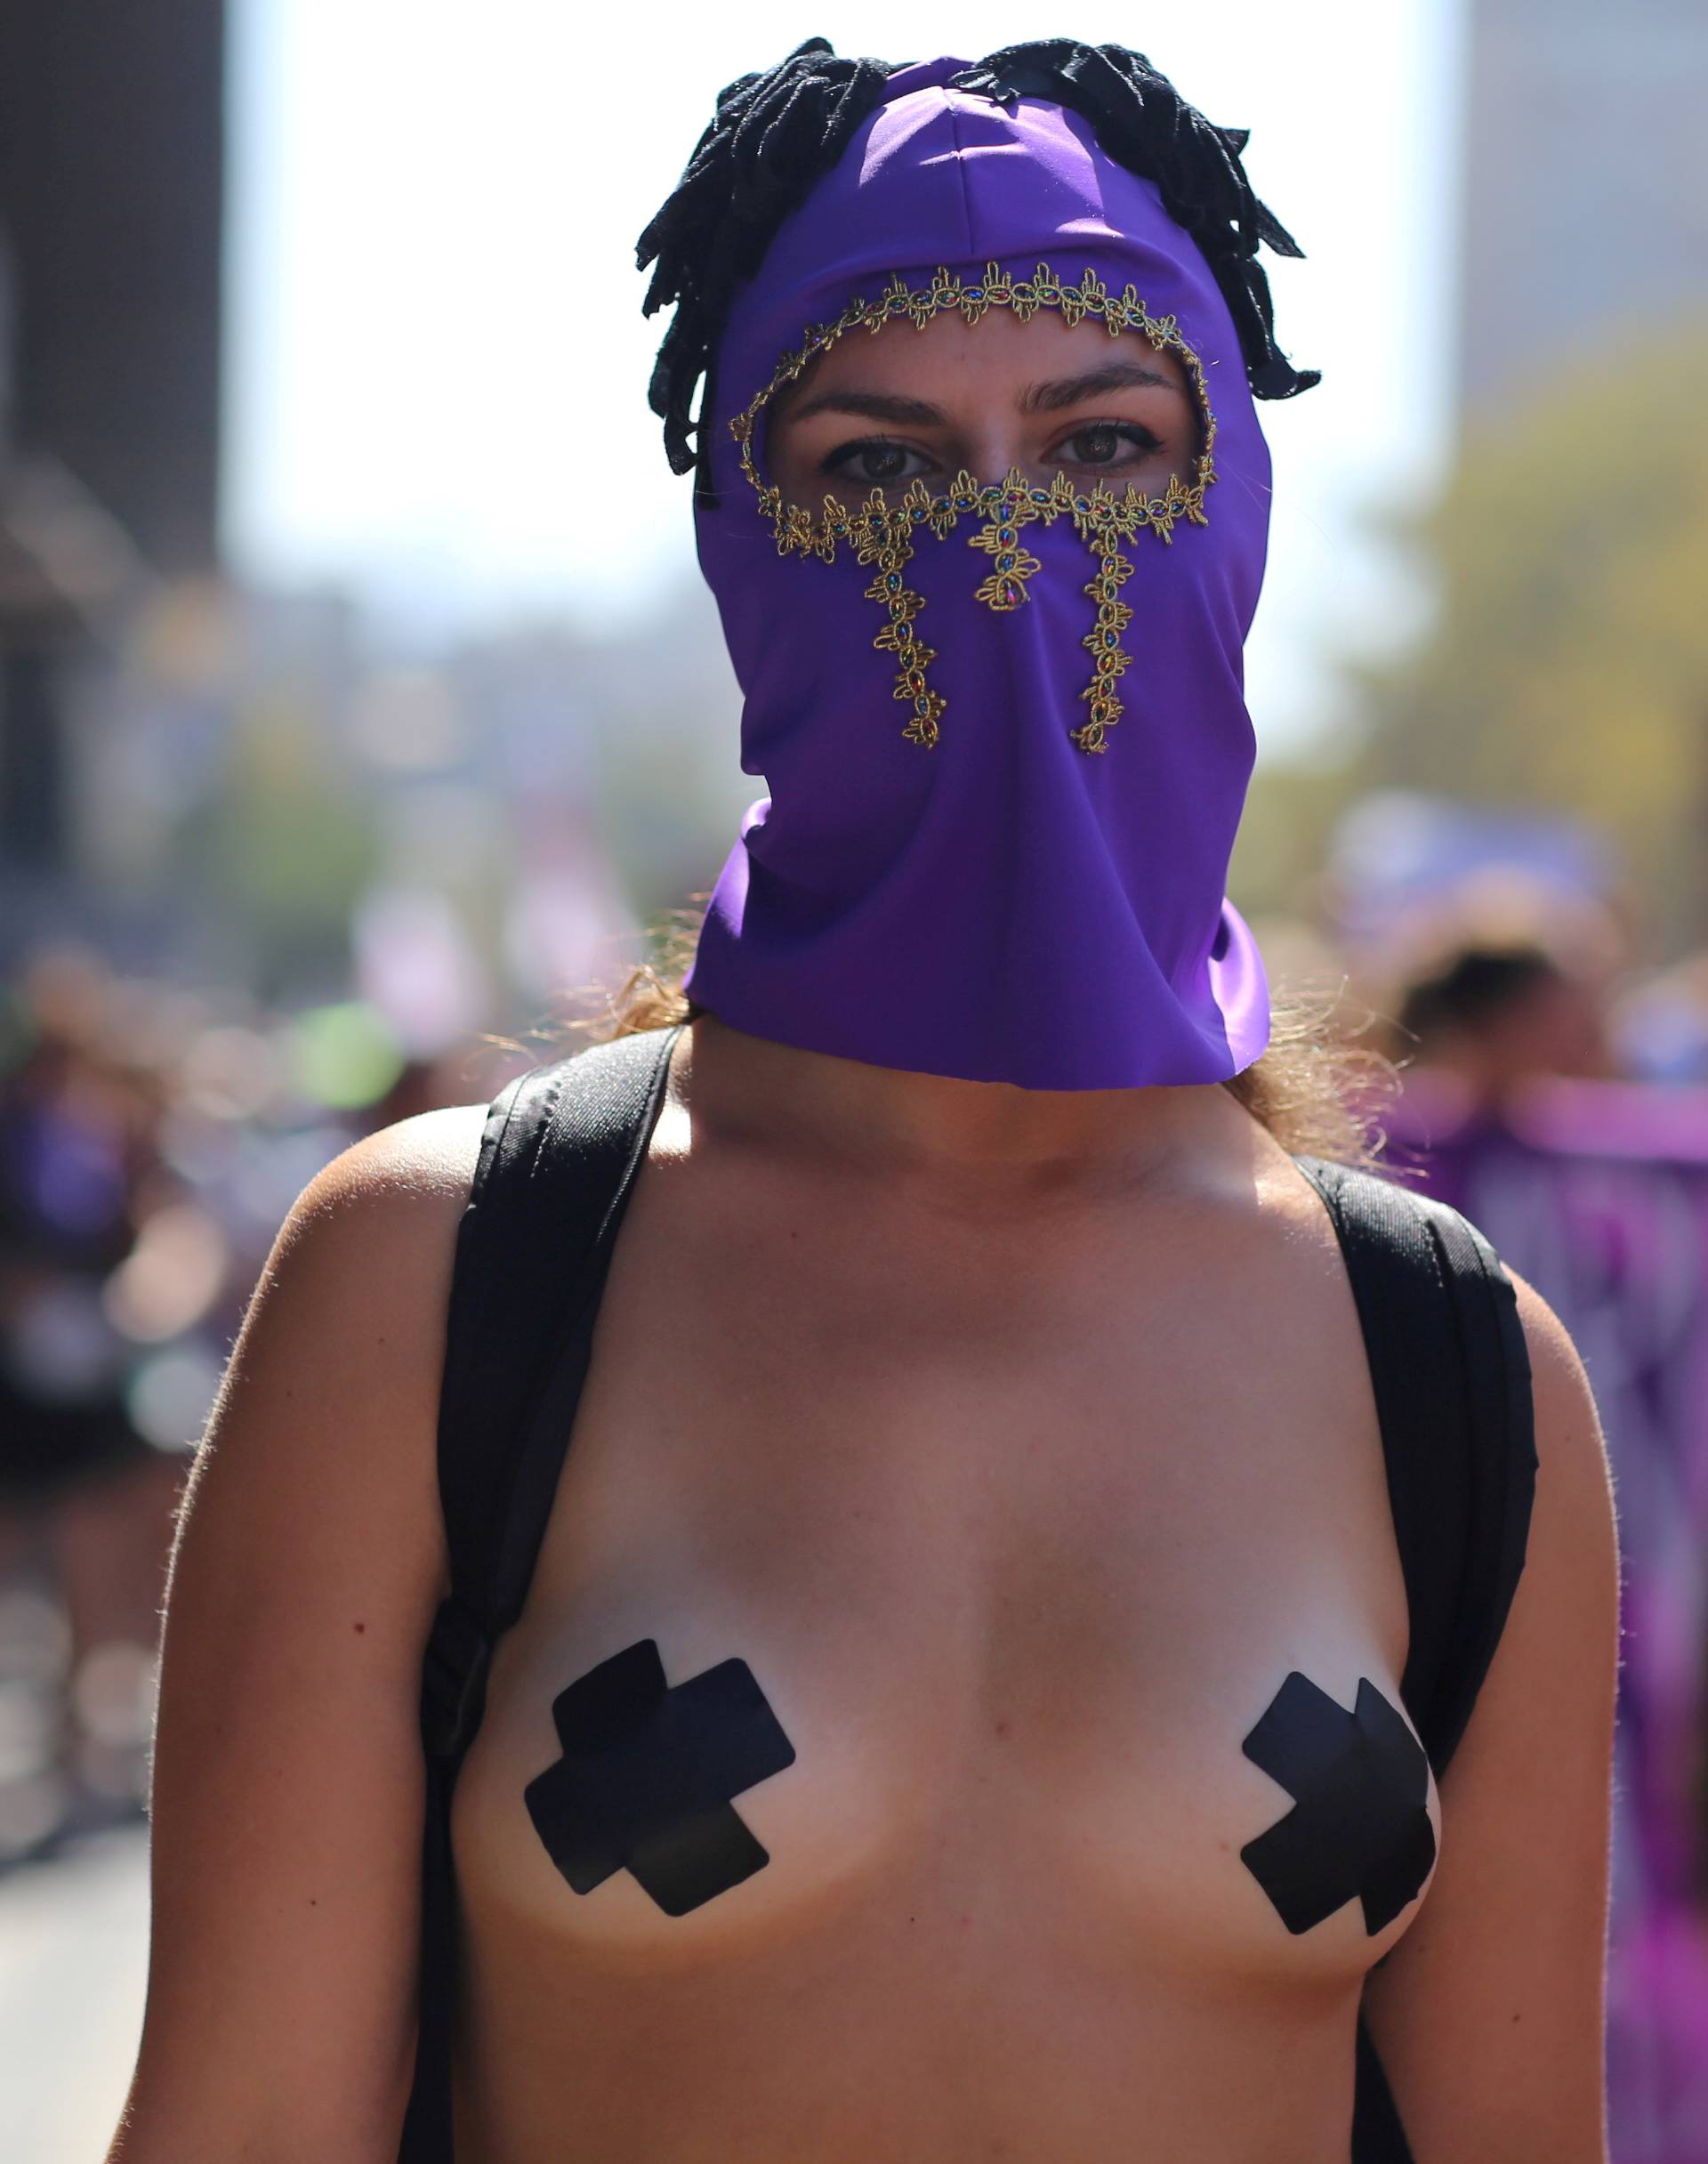 A woman takes part at a women's strike as part of International Women's Day activities in Santiago